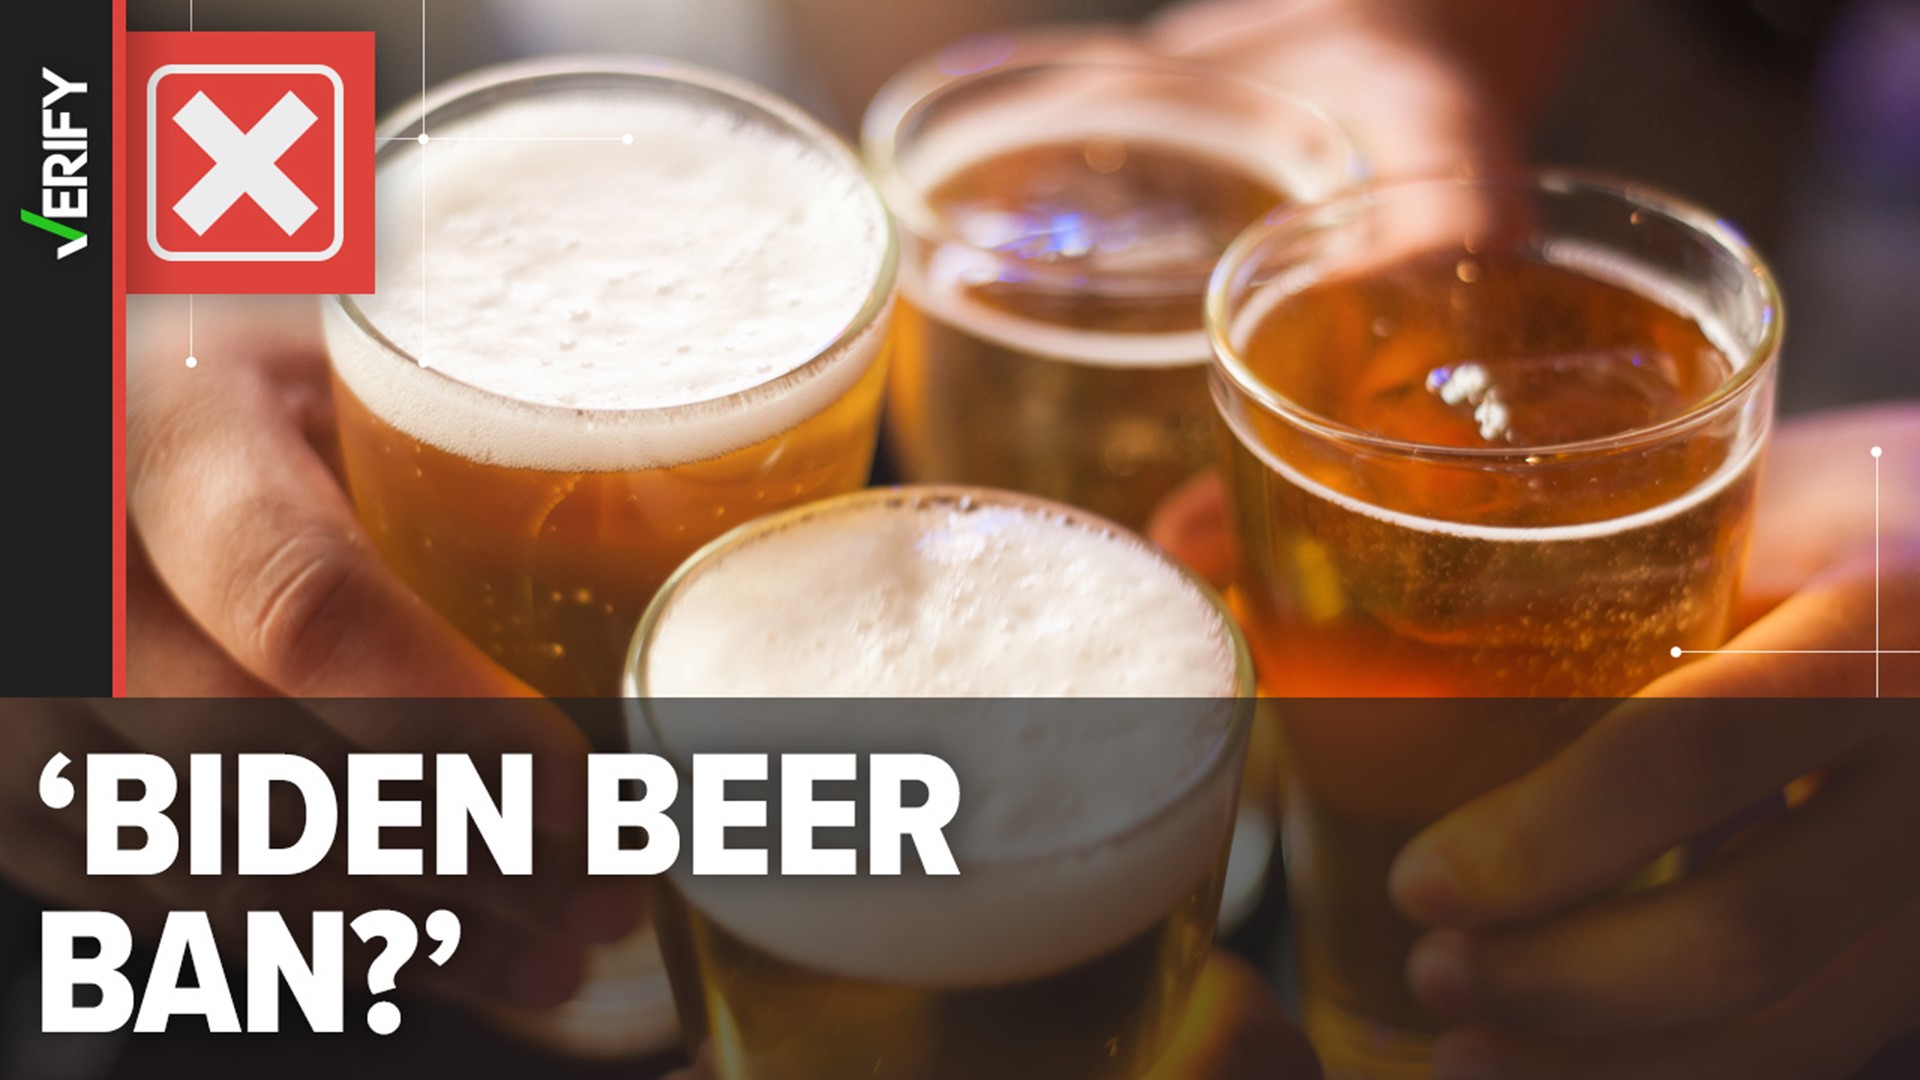 Concern over the 'Biden Beer Ban' stems from a government official's reference to Canada's guidance, which is one to two drinks per week.